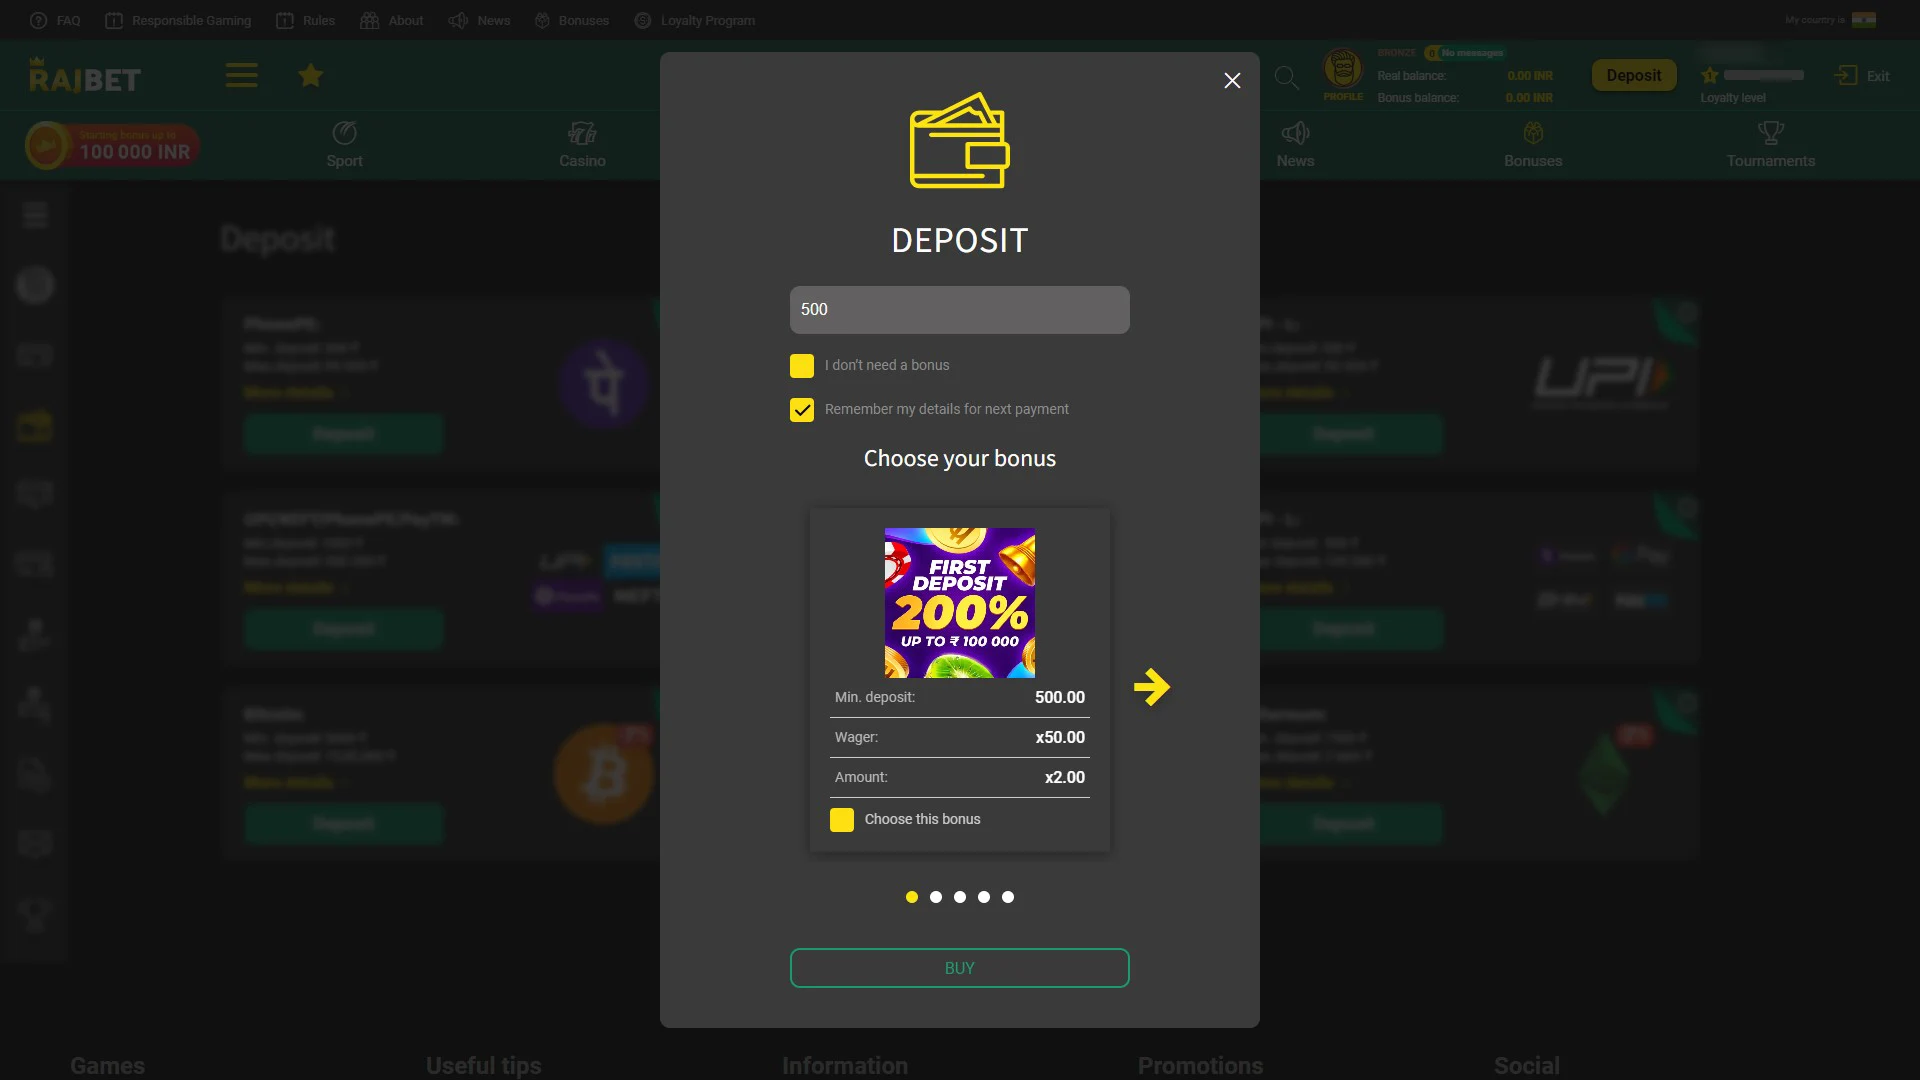 Go to the deposit section and make your first deposit.